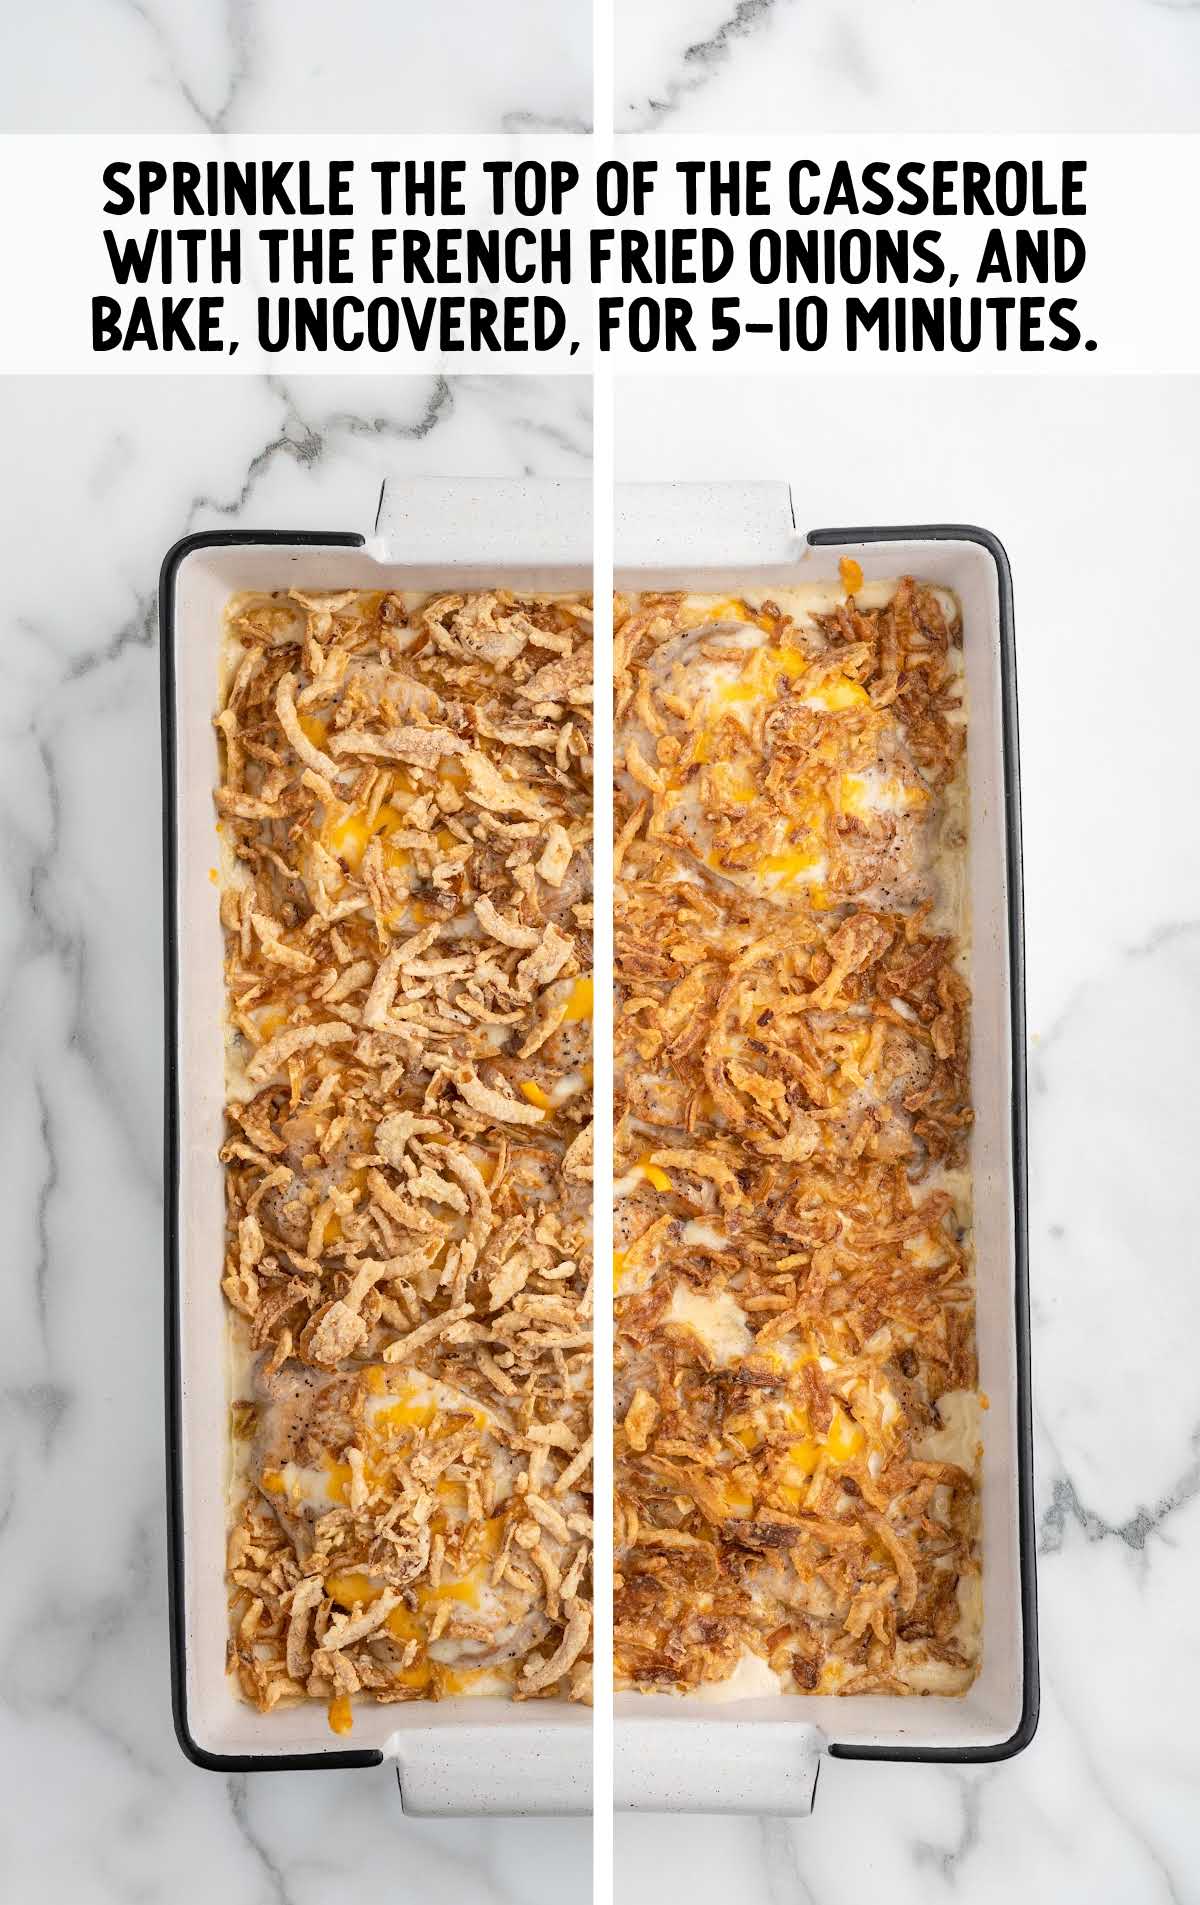 casserole sprinkled with fried onions